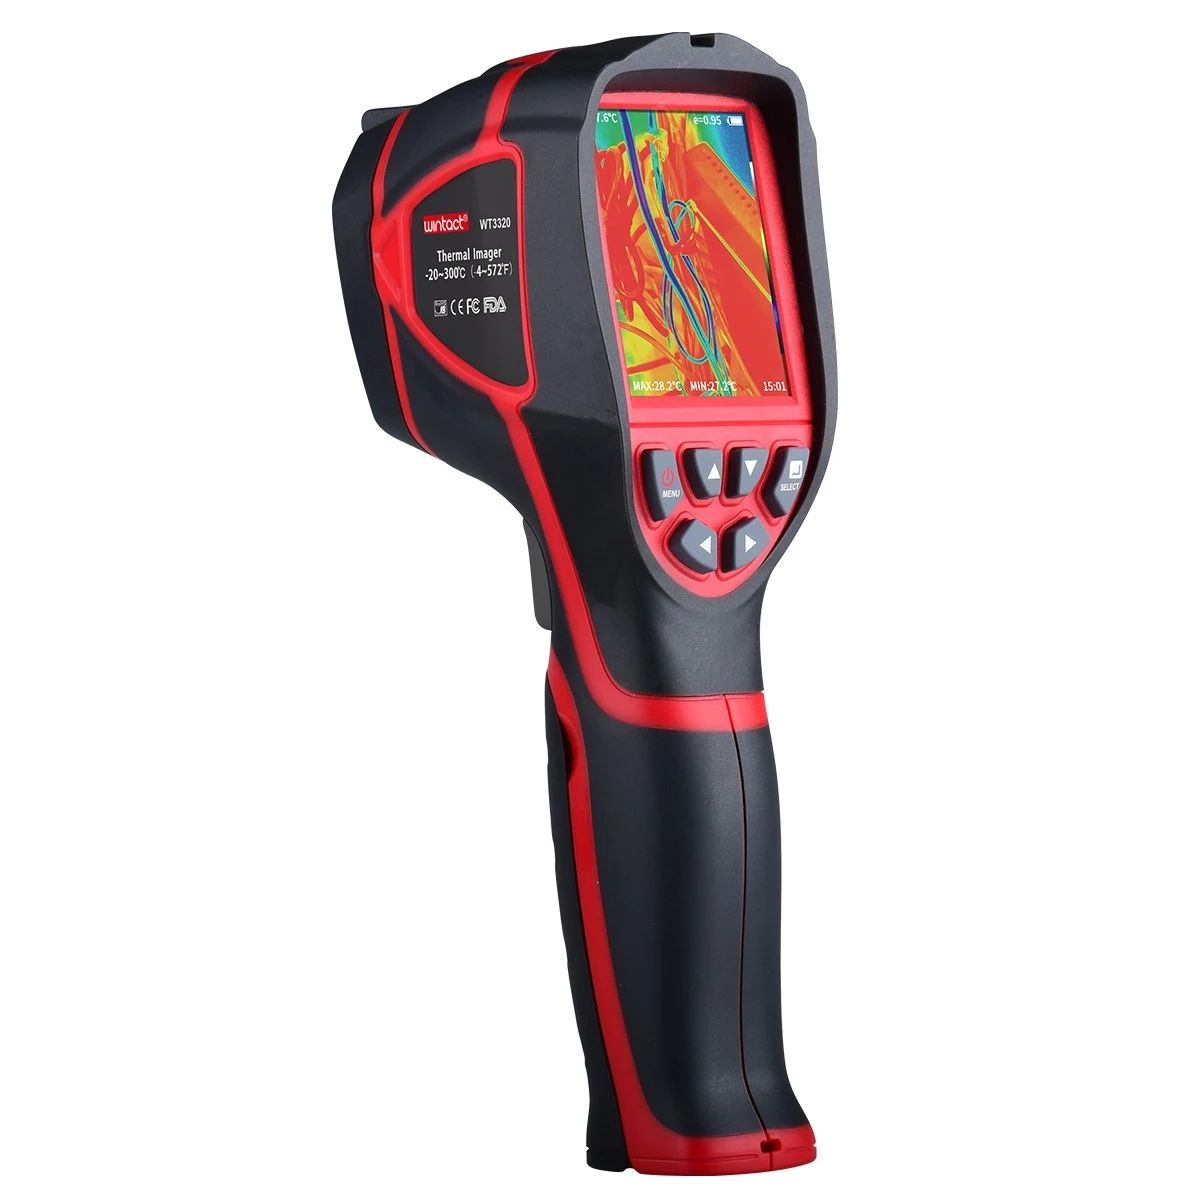 WT3320-Handheld-Infrared-Thermal-Imager-320240-Infrared-Image-Resolution-28inch-Color-Screen-Profess-1757741